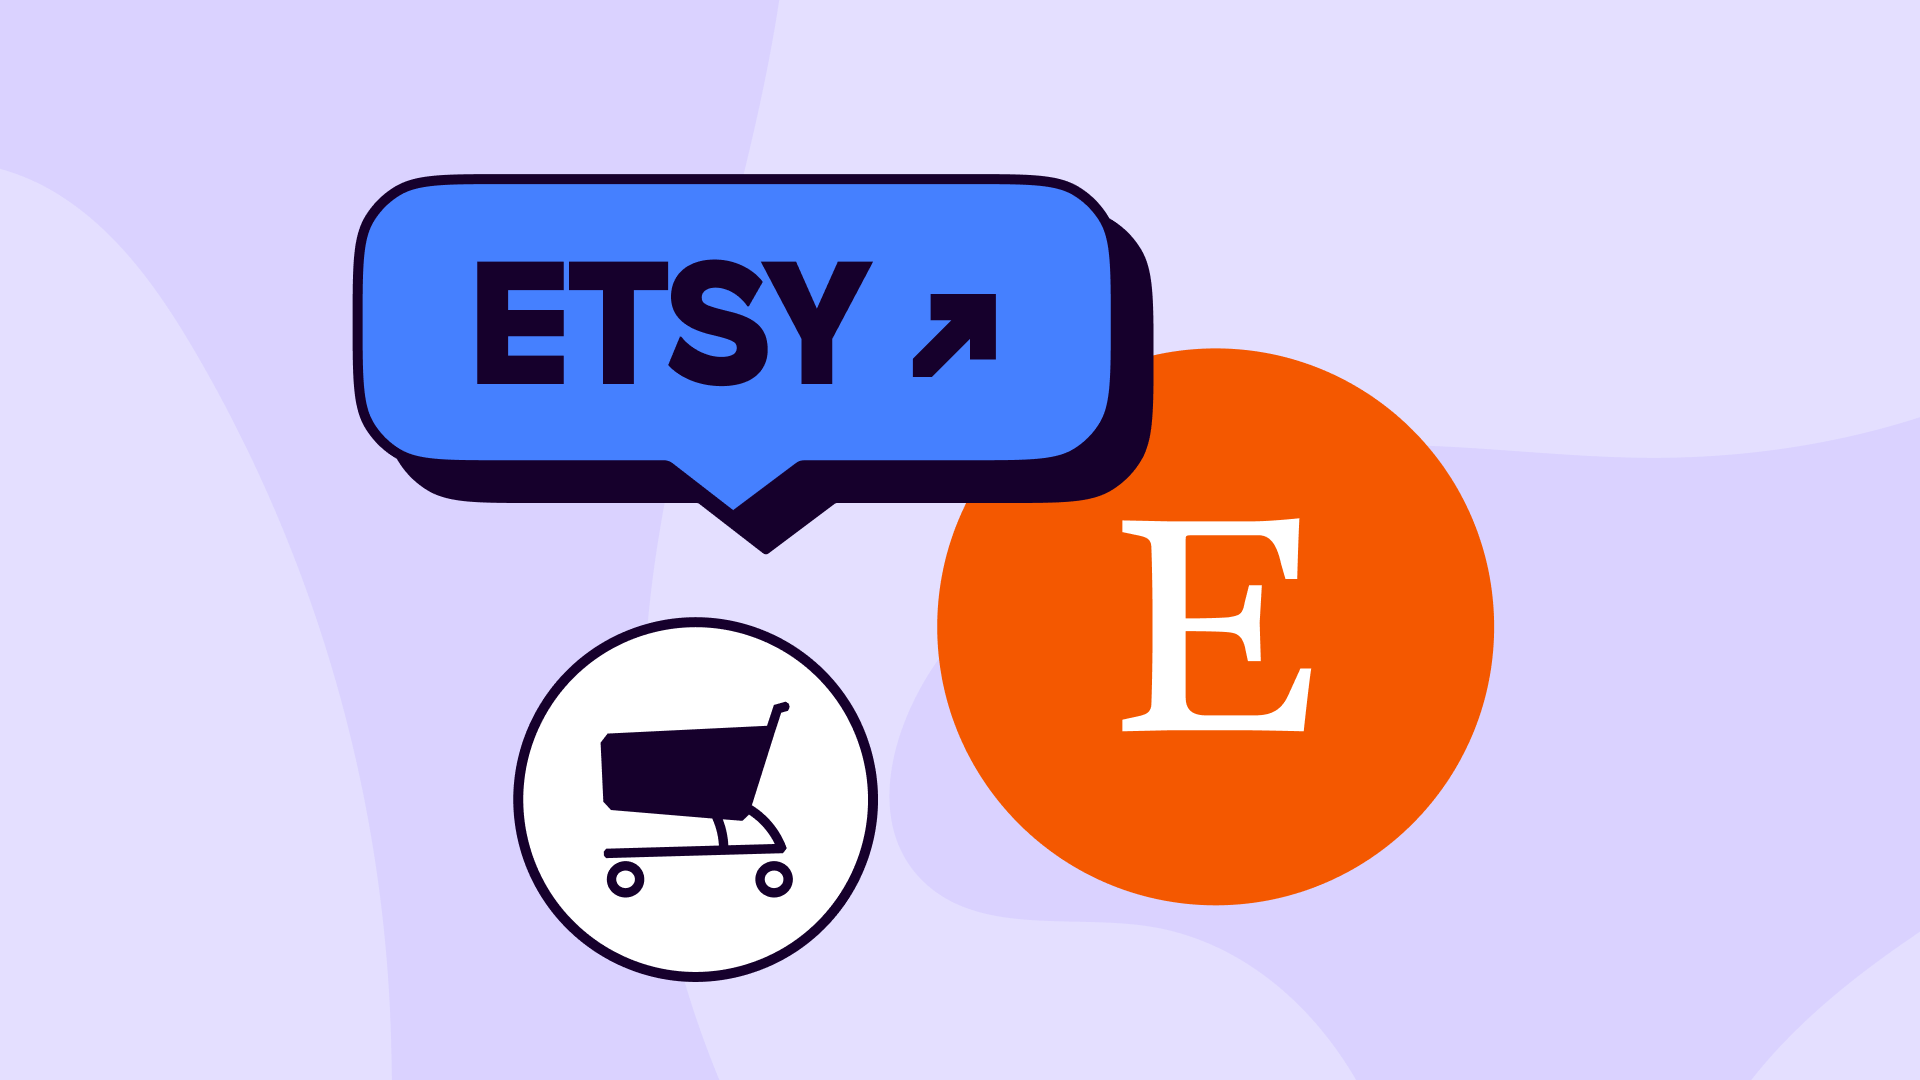 How to buy and sell Etsy shares